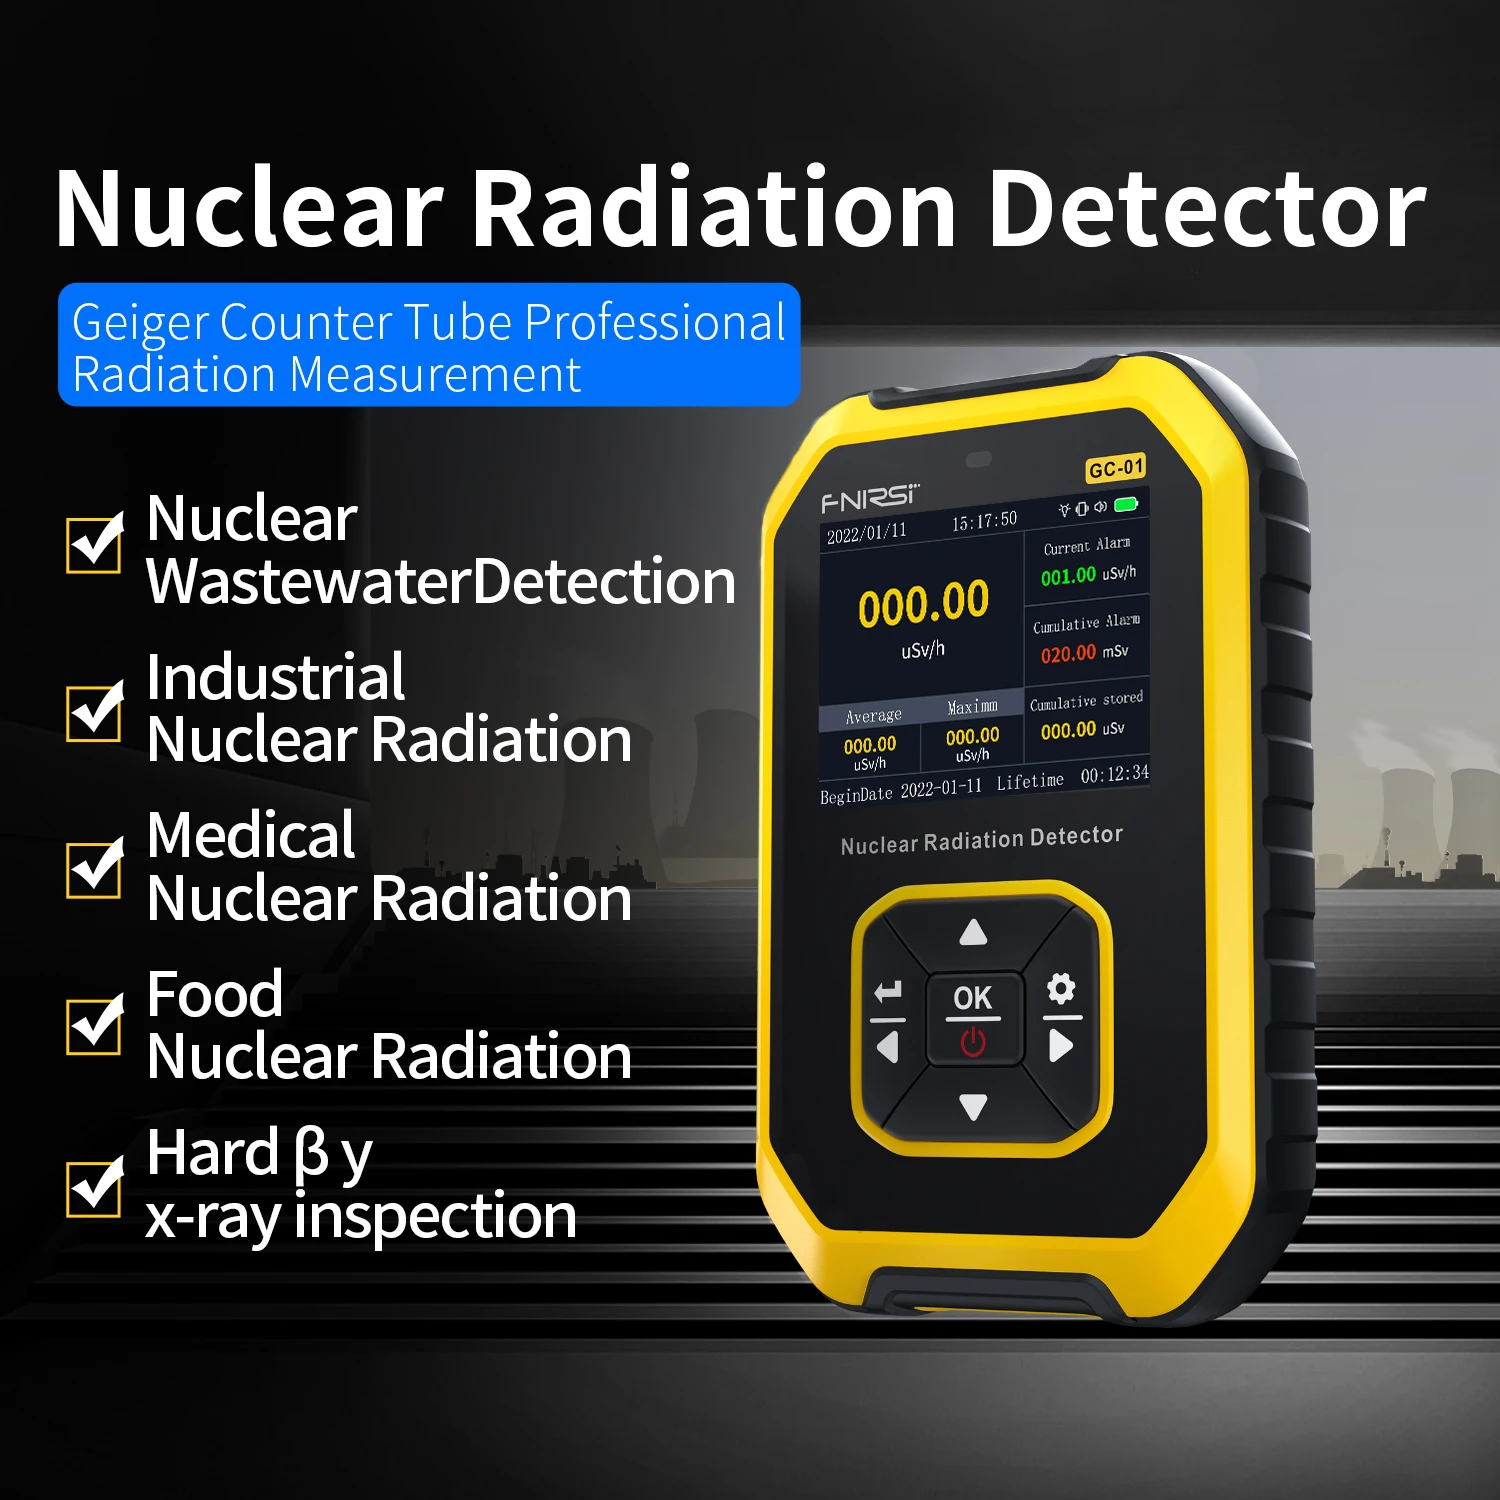 GC01 Geiger Counter Nuclear Radiation Detector Professional Marble Radiation Ionization Personal Dose Alarm Radioactive Tester